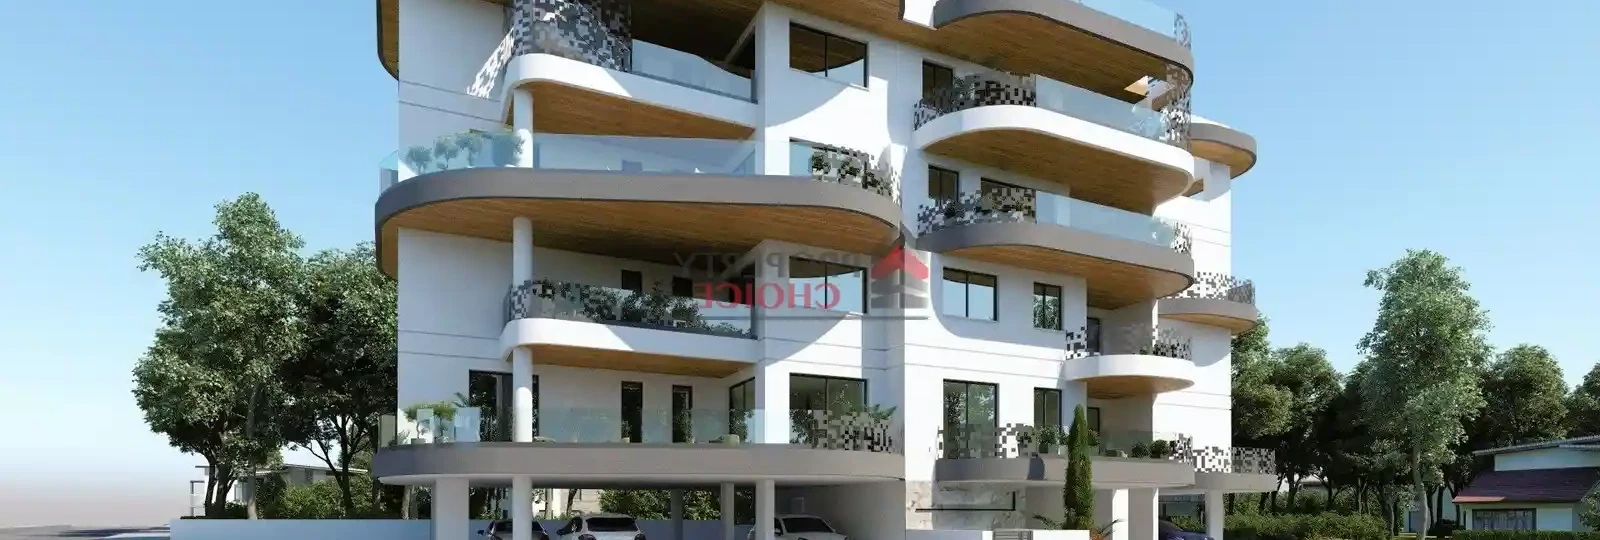 3-bedroom apartment fоr sаle €310.000, image 1